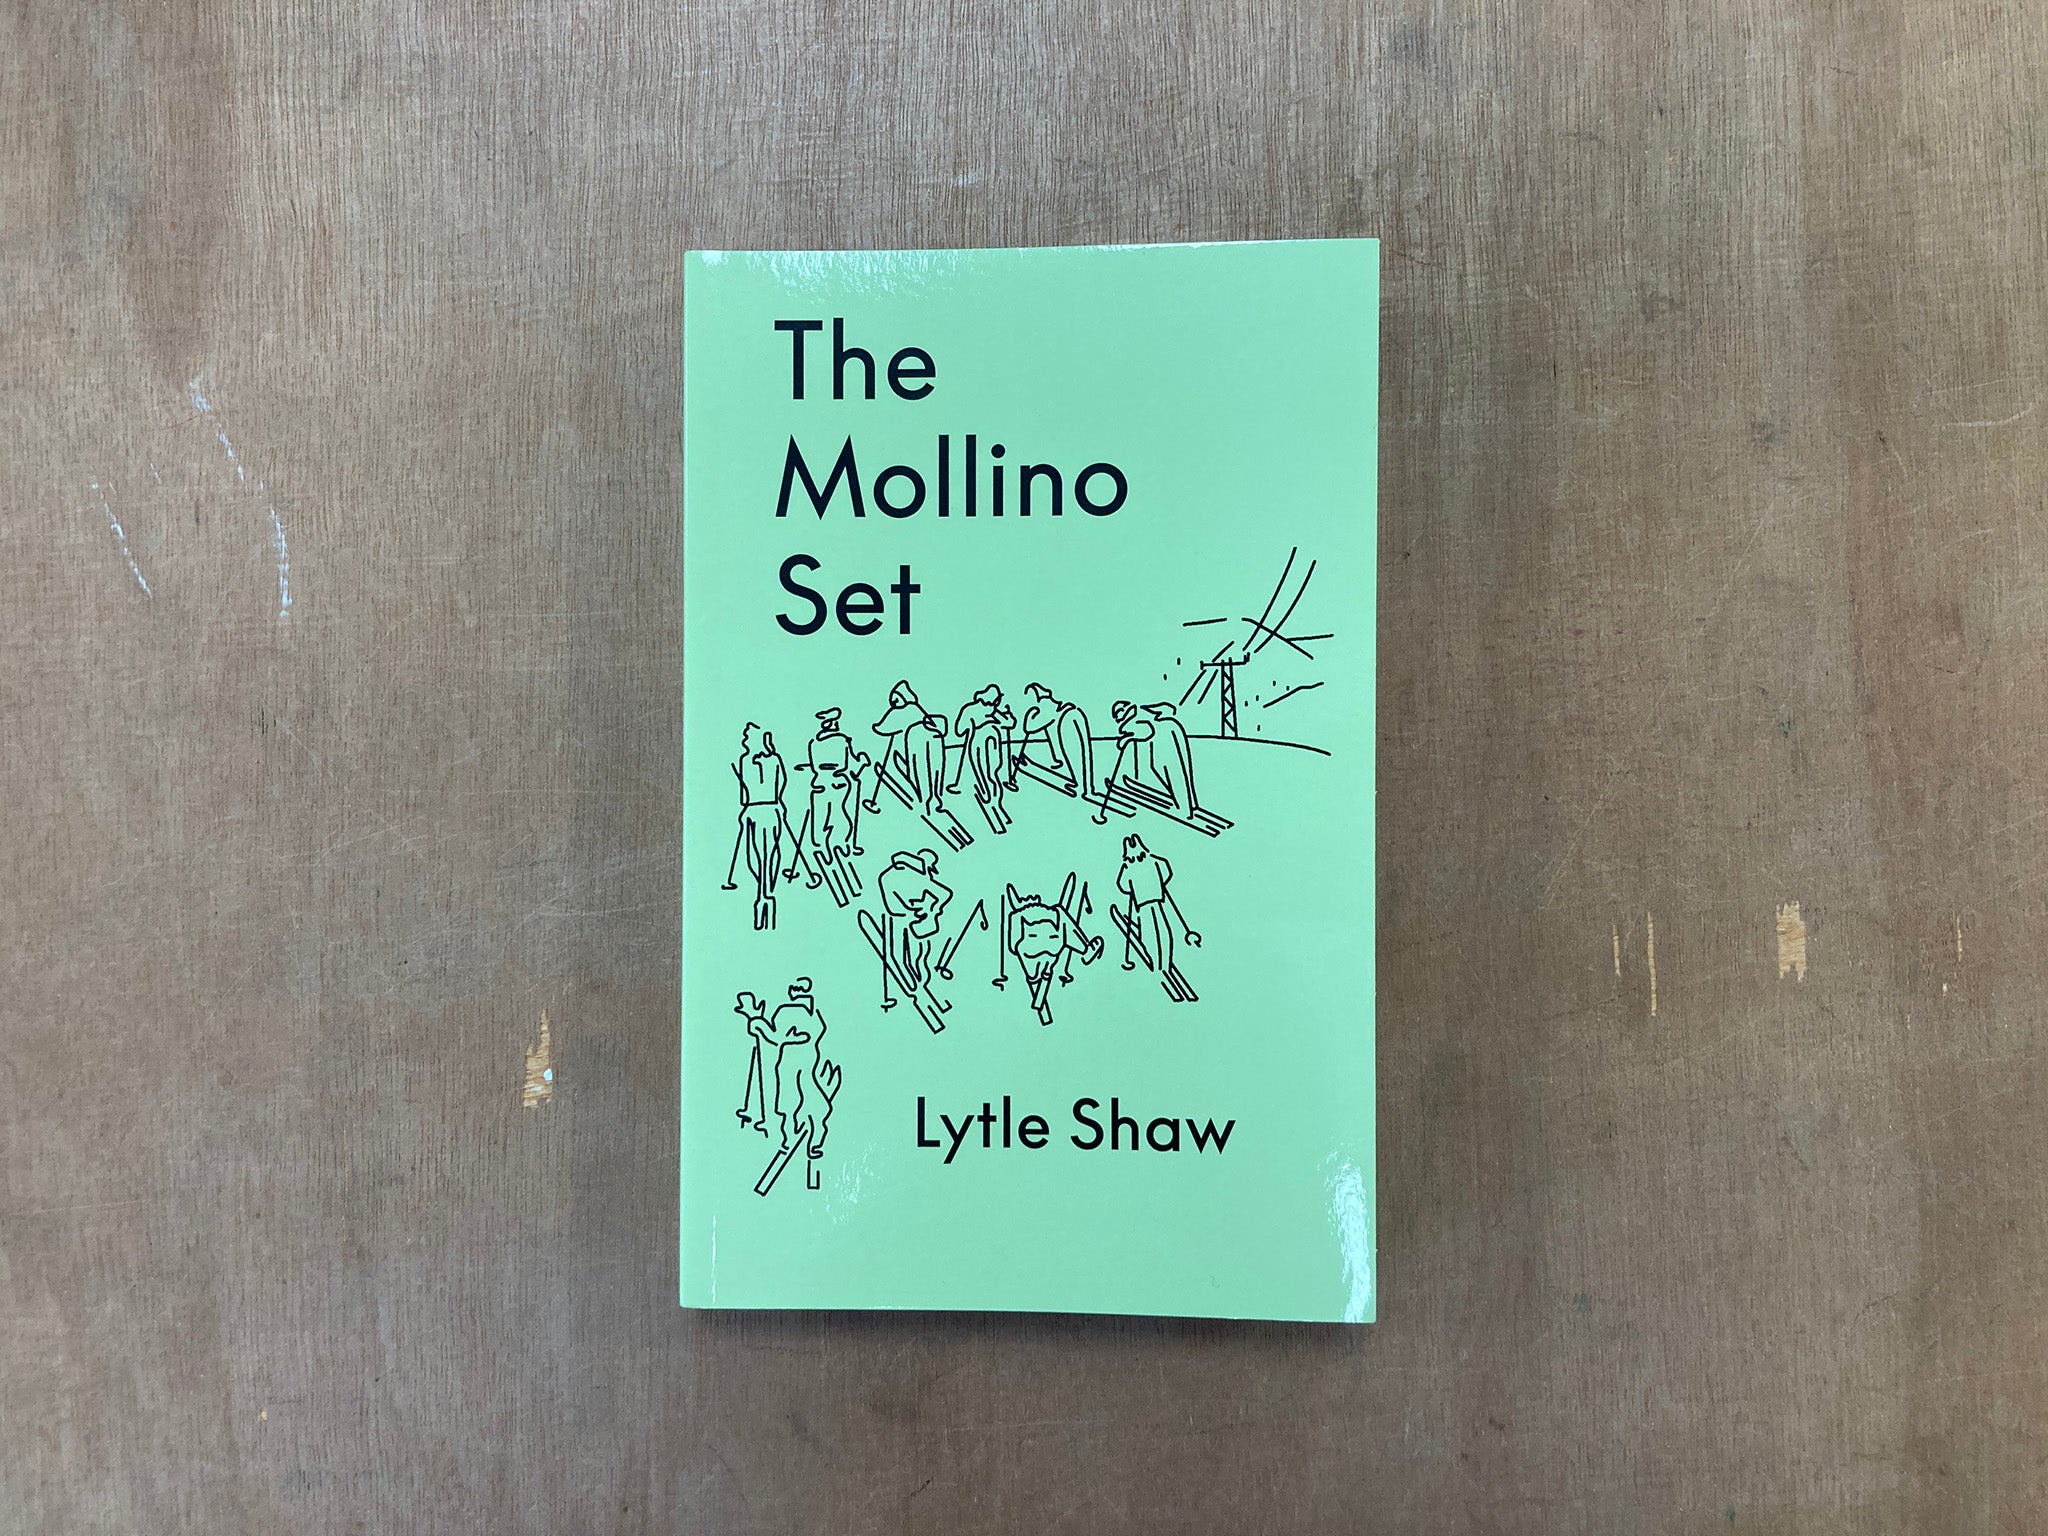 THE MOLLINO SET by Lytle Shaw